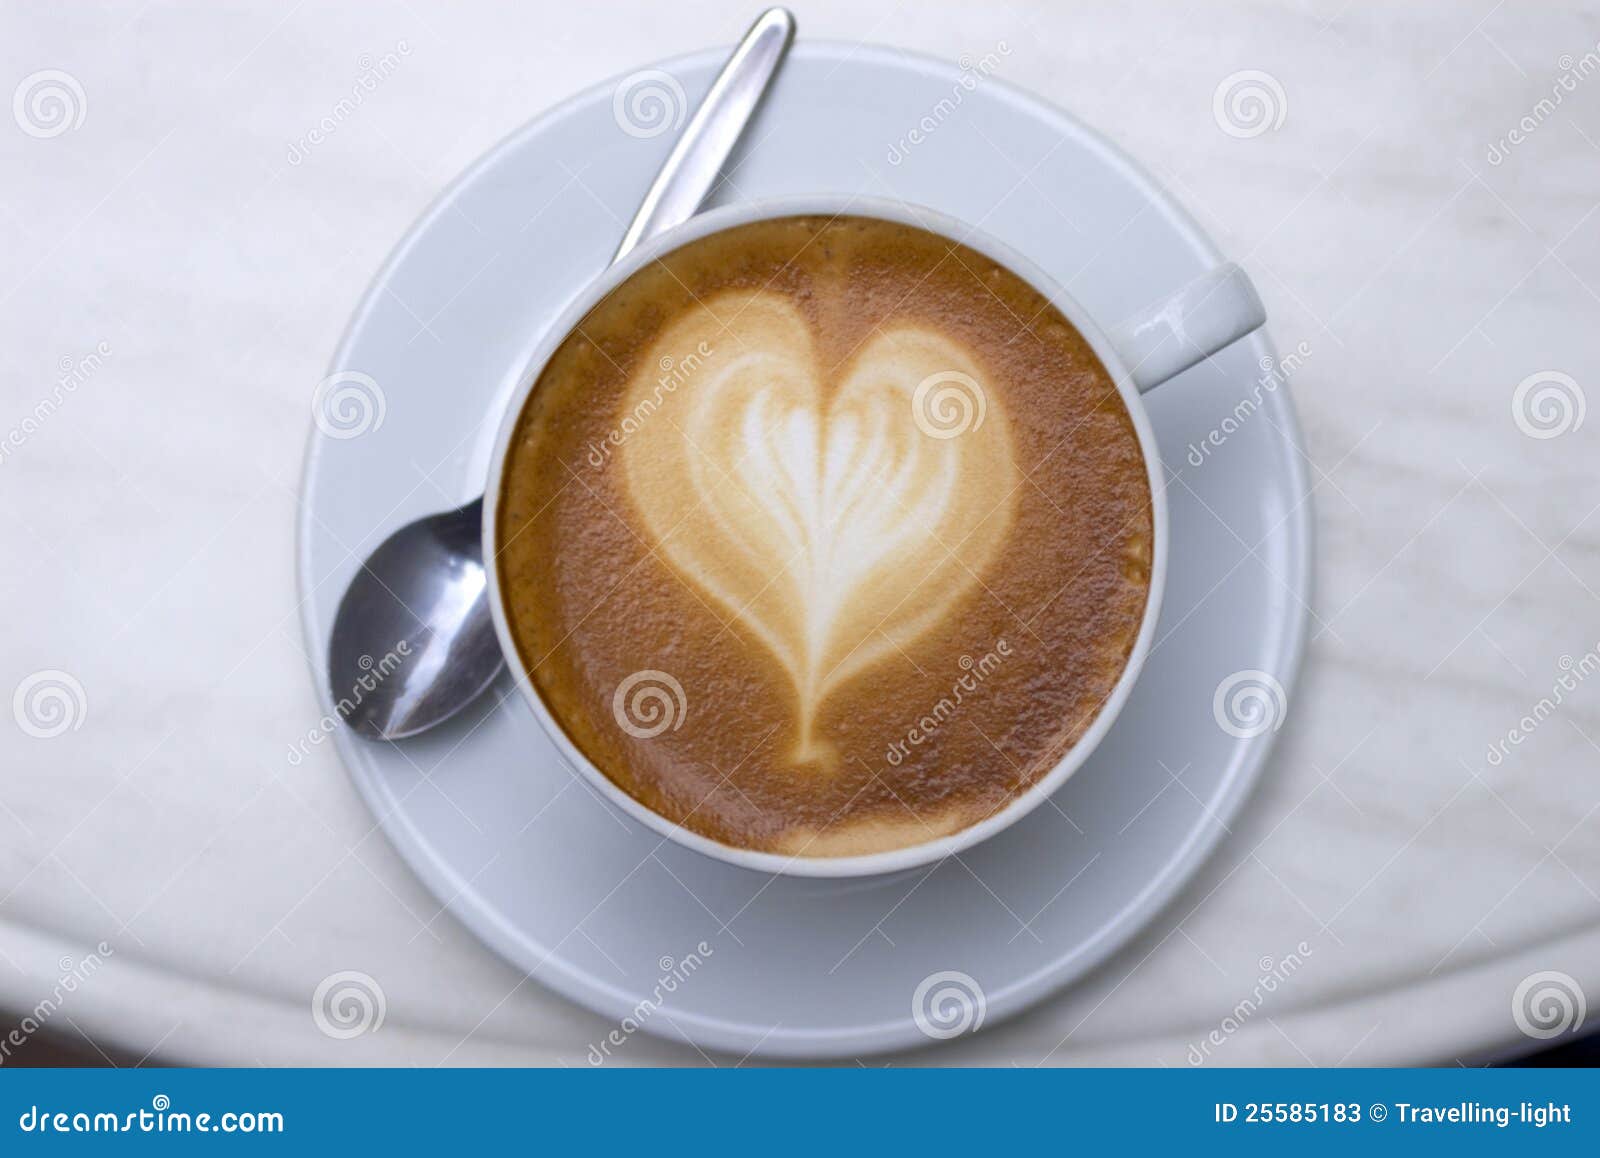 Objects  I Love Coffee Stock Photos  Image: 25585183